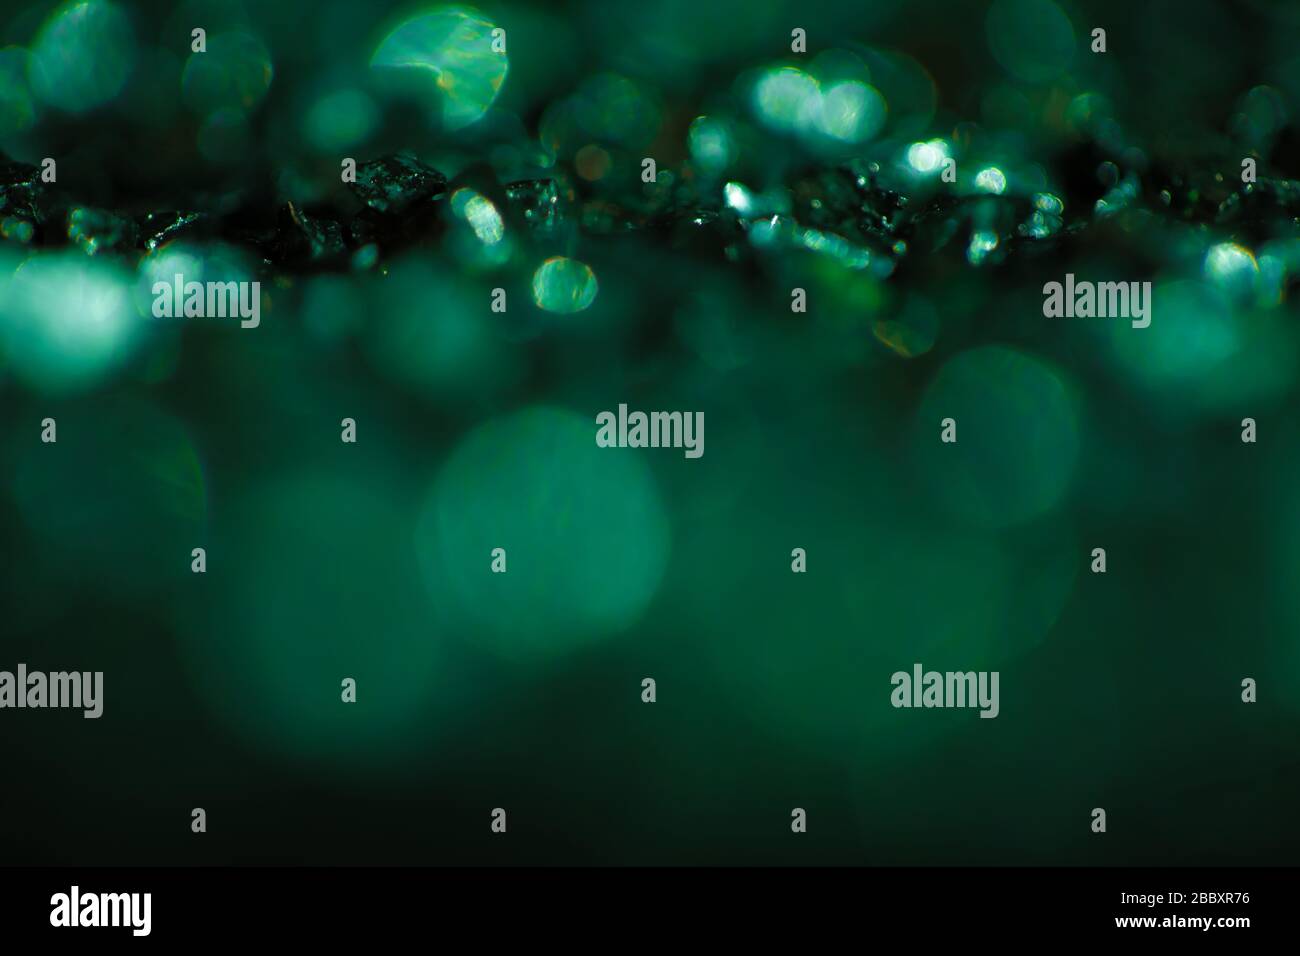 Monochrome emerald abstract background with bokeh defocused lights. Stock Photo